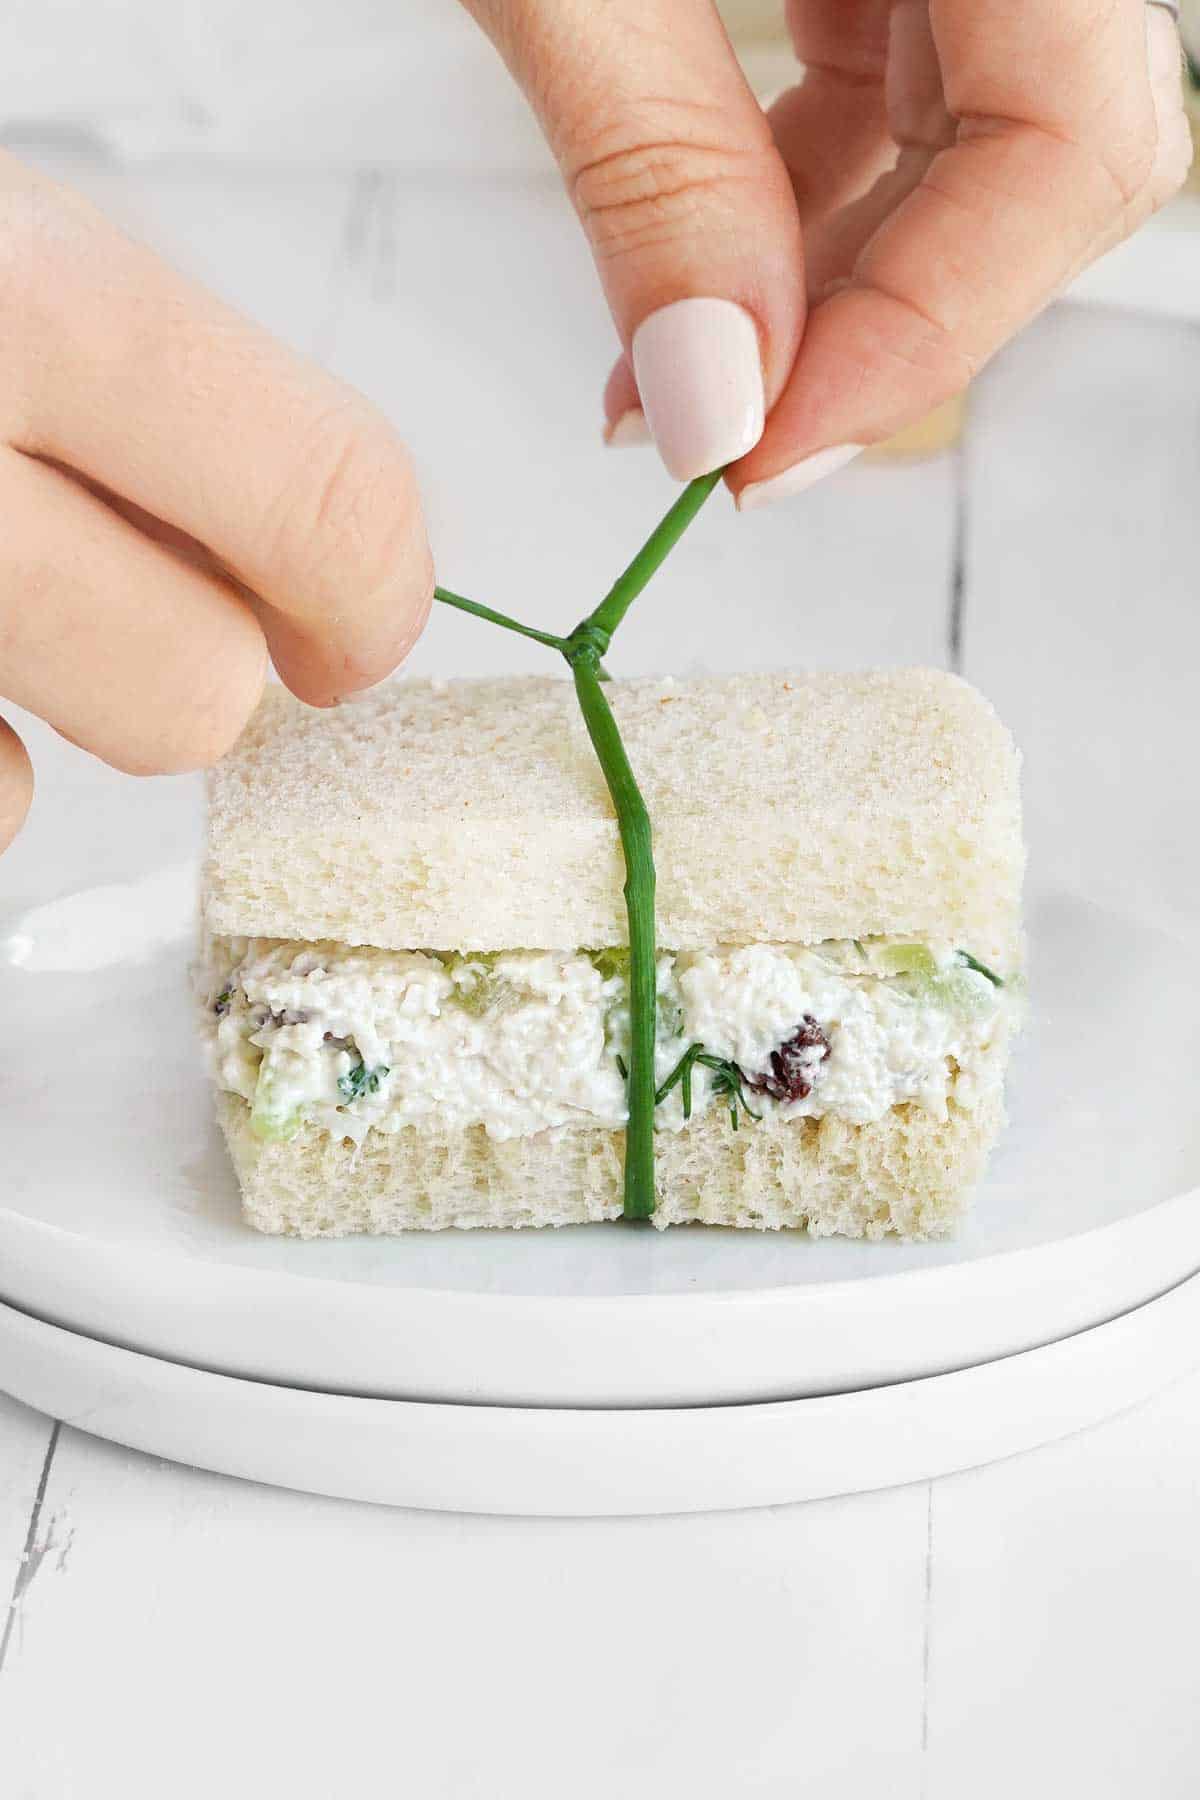 Hands tying a chive around a sandwich on a white plate.